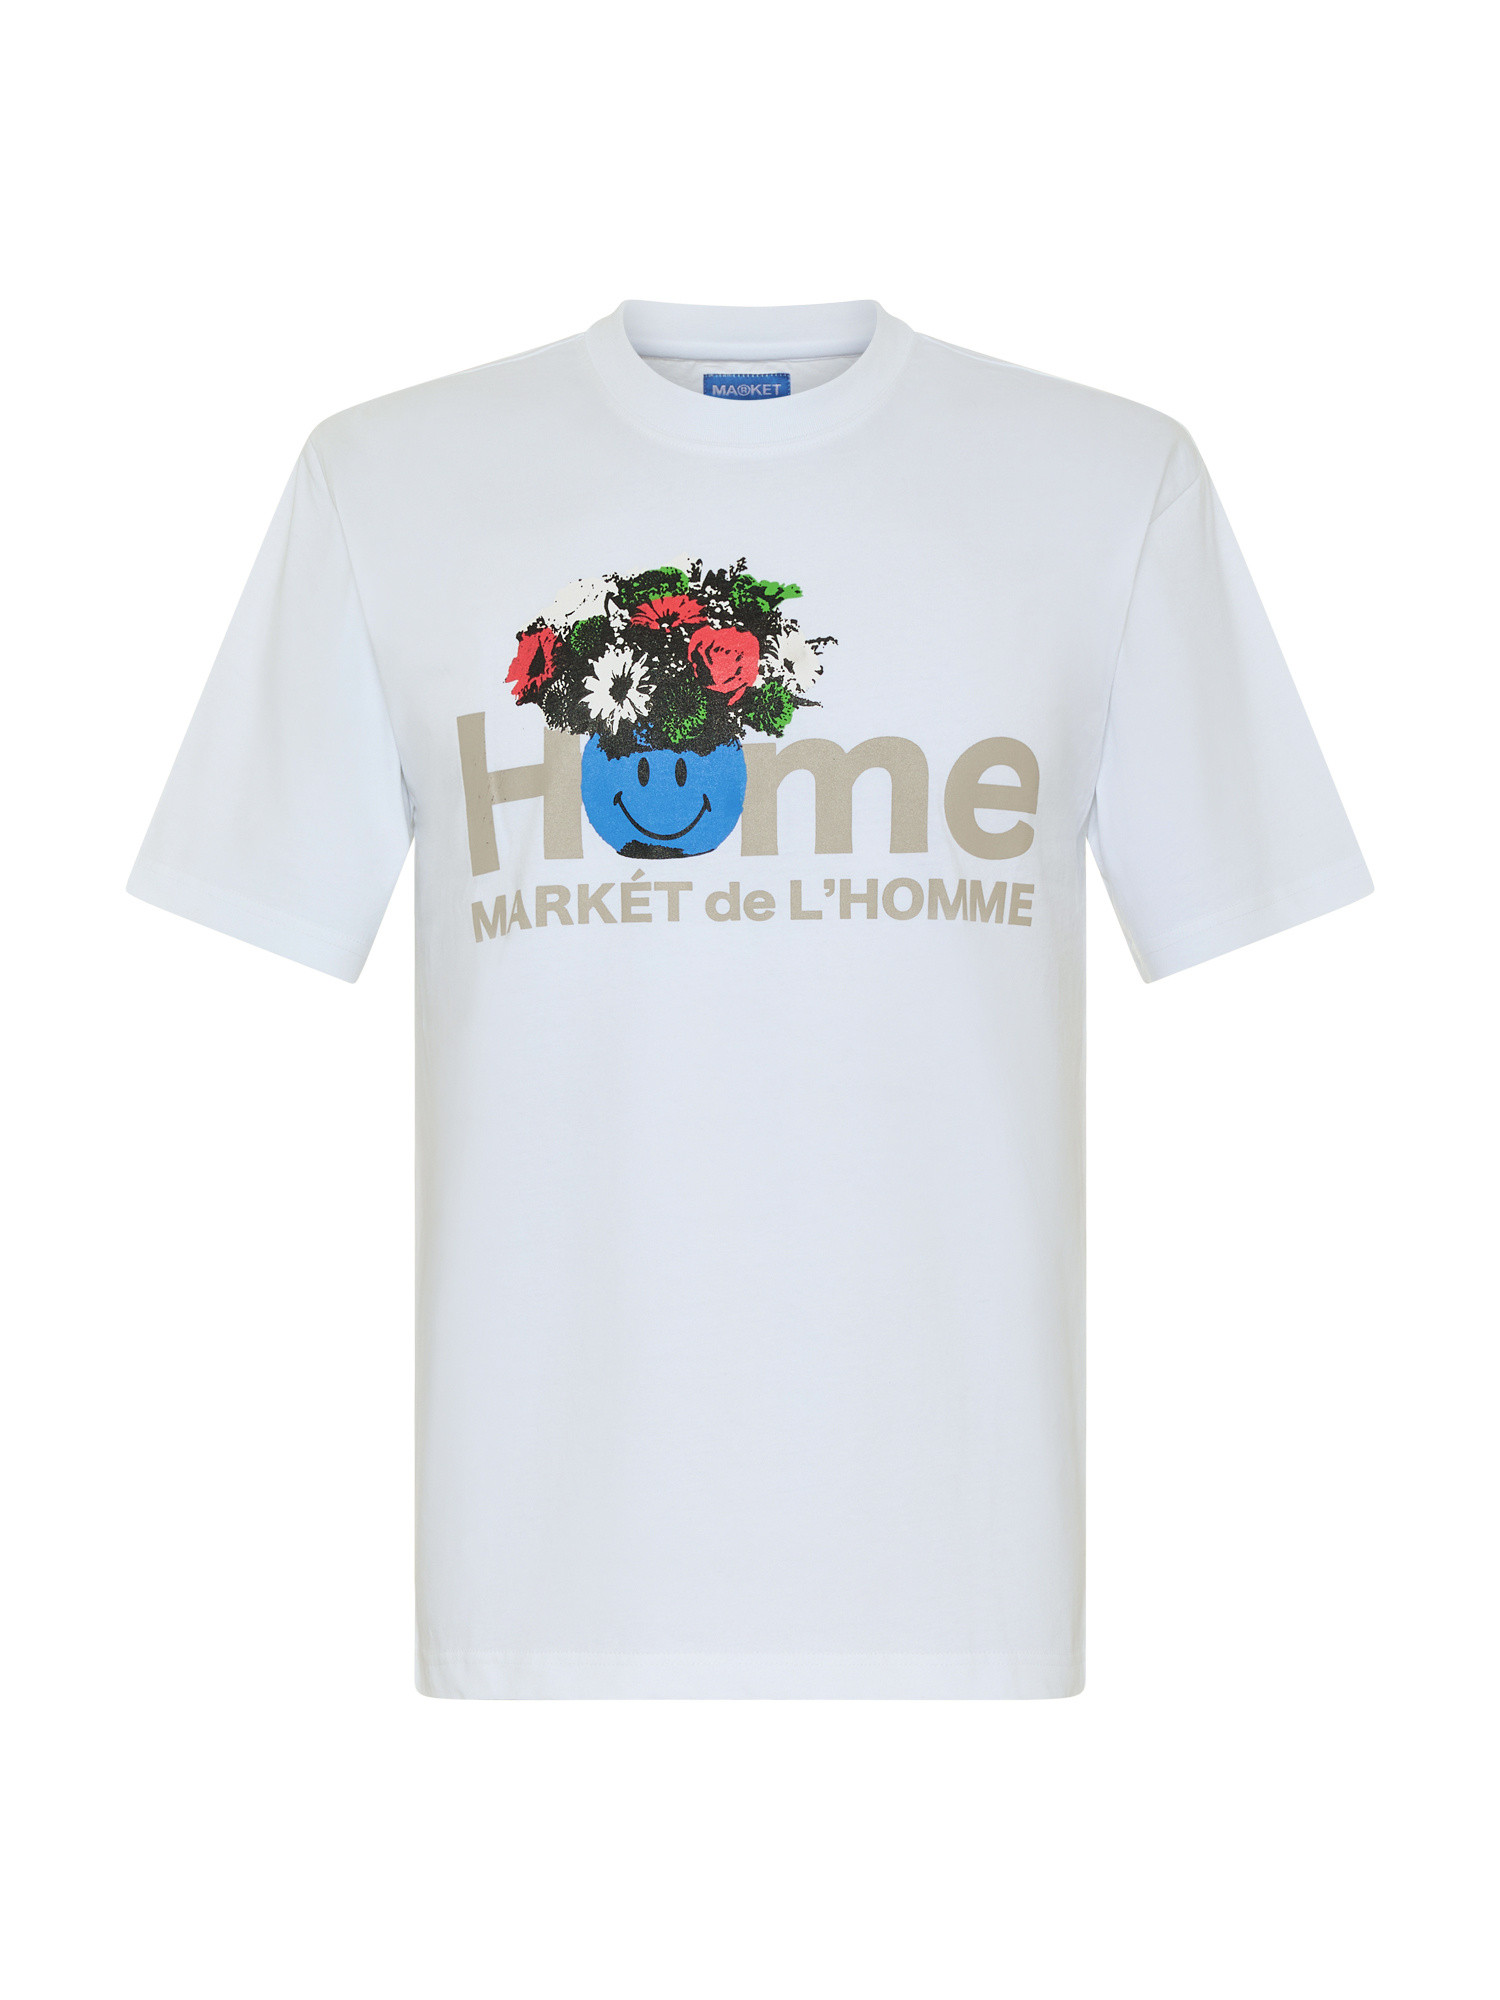 Market - T-shirt in cotone con stampa, Bianco, large image number 0